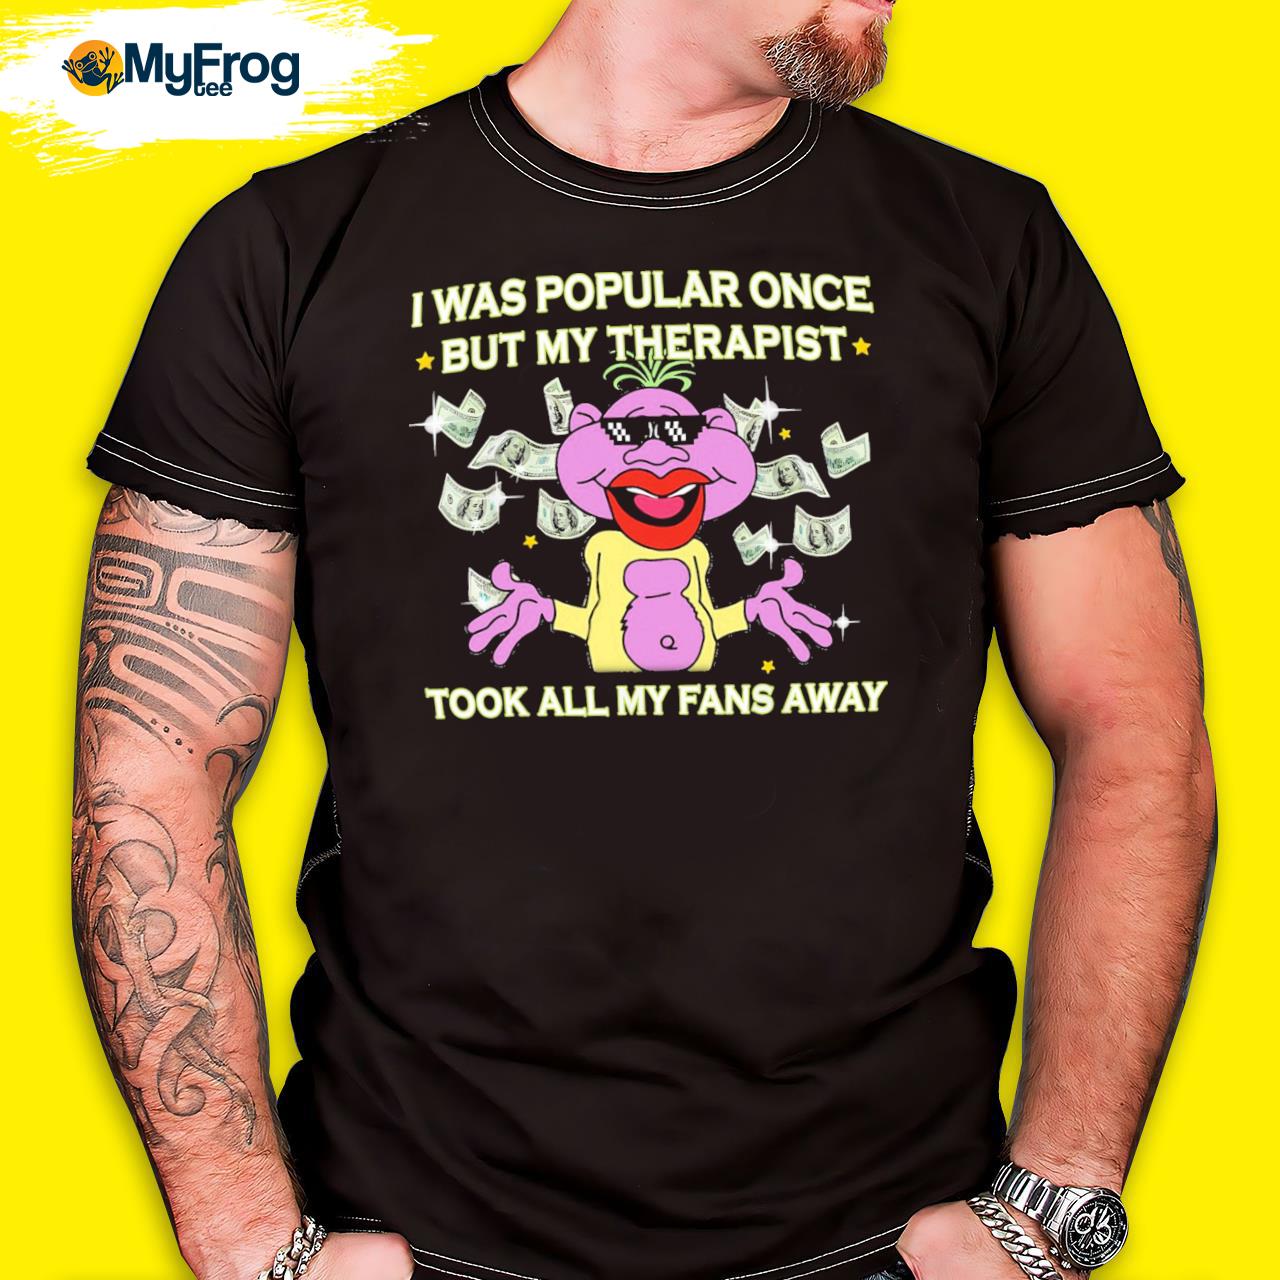 Jeff Dunham Dollar I was popular once but my therapist took all my fans away shirt